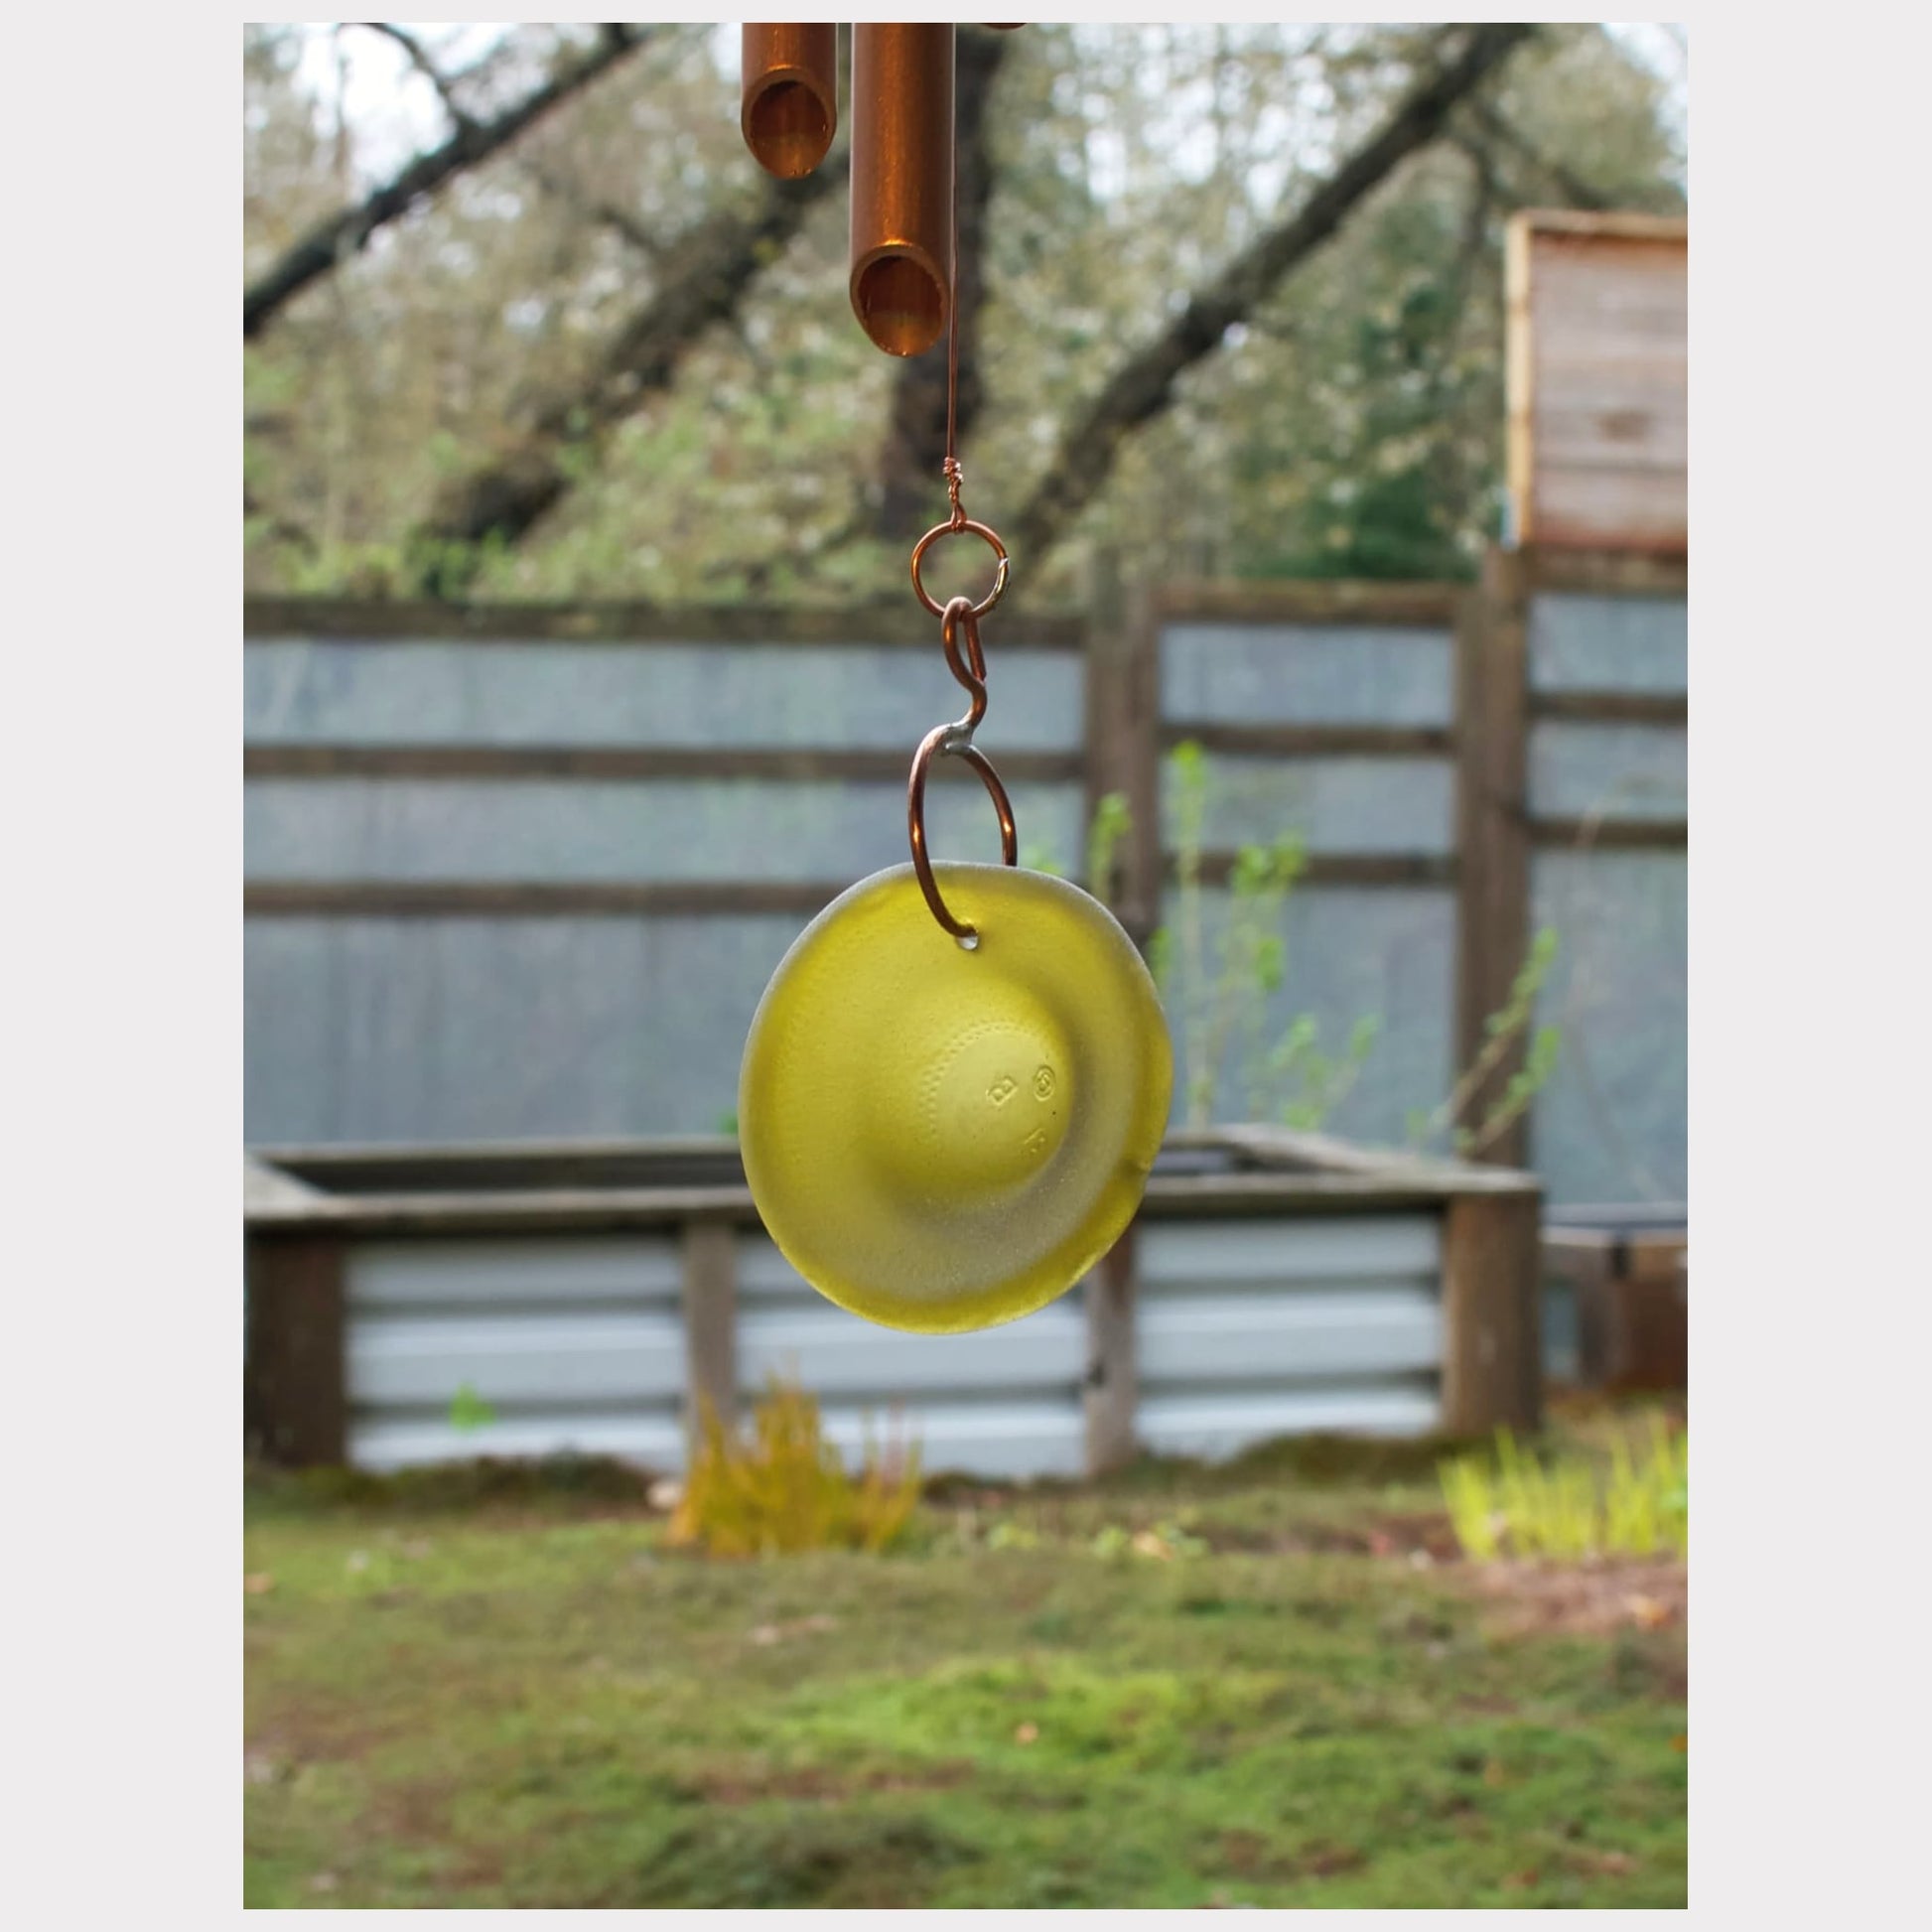 sea glass windsail for a wind chime